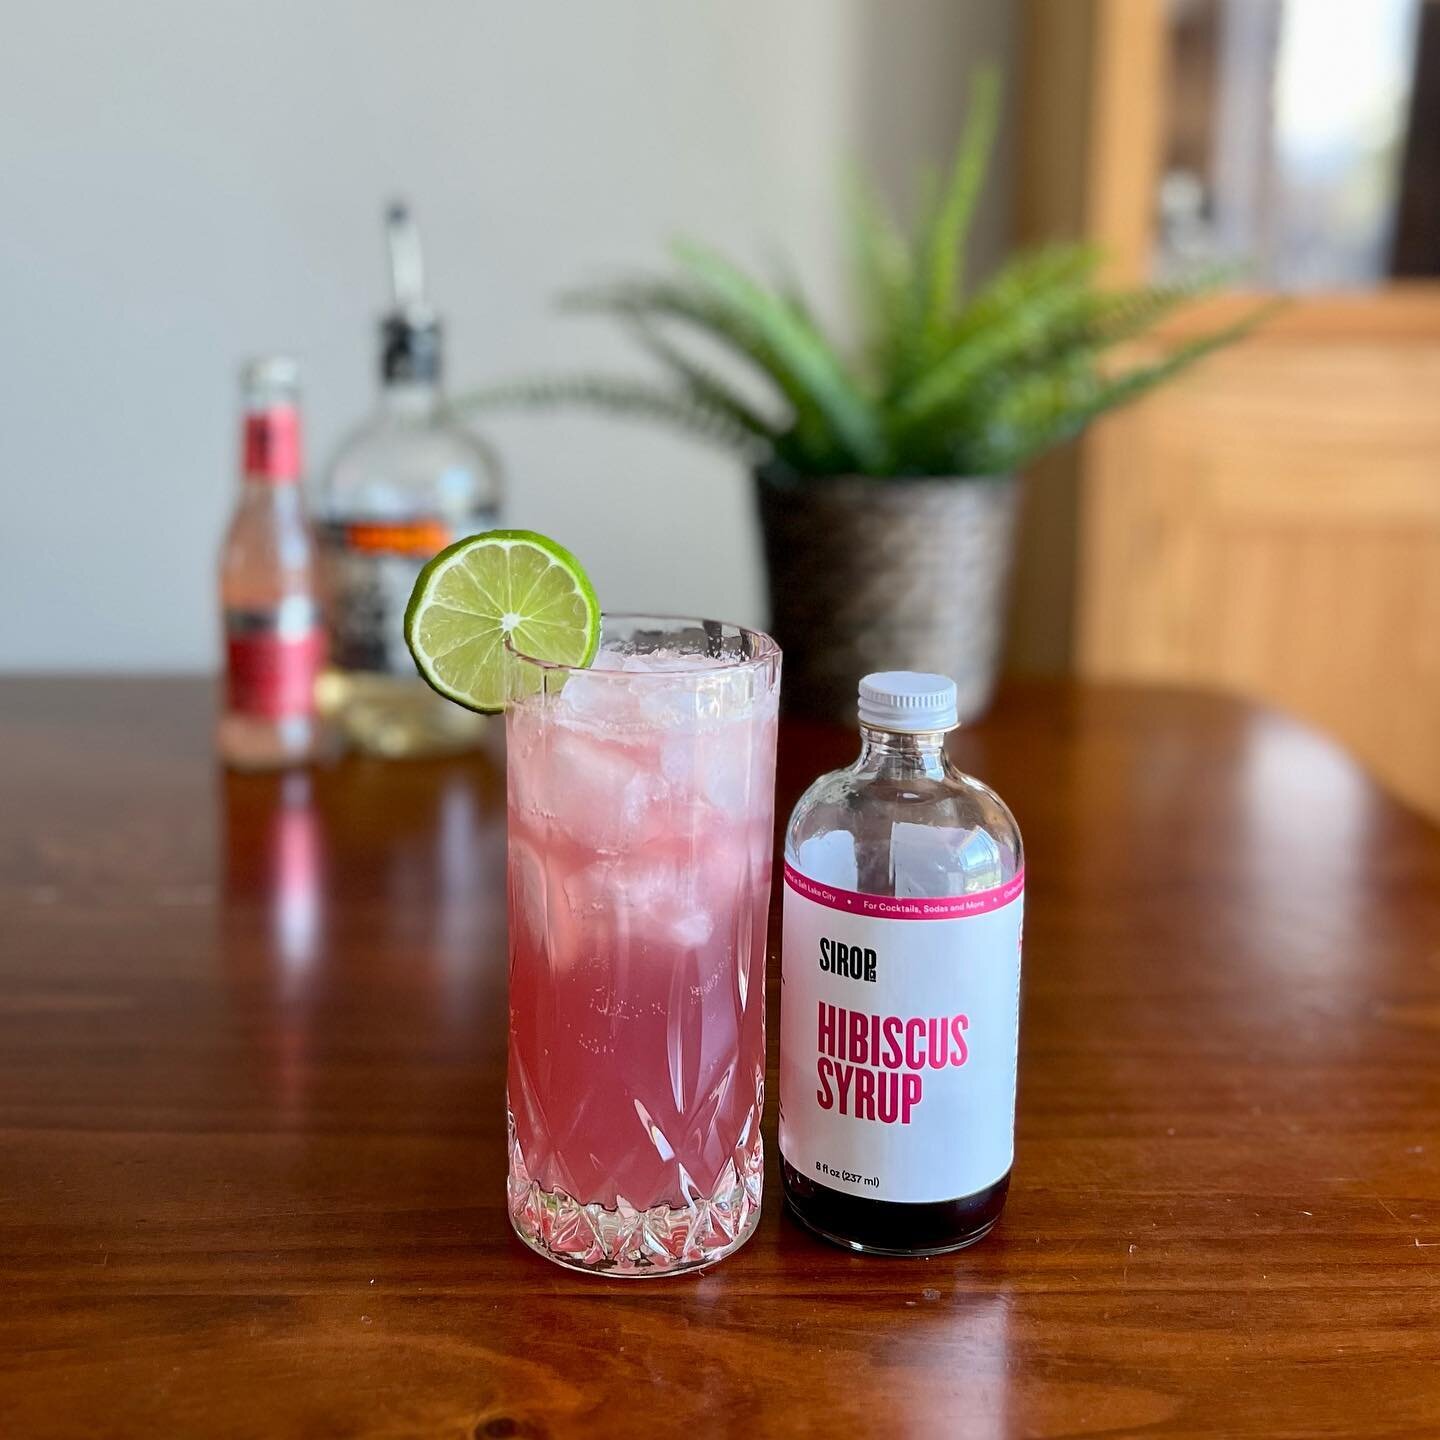 We&rsquo;re all in on tequila this week. Enjoy this classic in the warm weather!

Hibiscus Paloma
1.5 oz @espolontequila tequila 
3/4 @sirop_co hibiscus syrup
1/2 fresh lime juice
4oz @fevertreemixers grapefruit soda

Shake everything but the soda wi